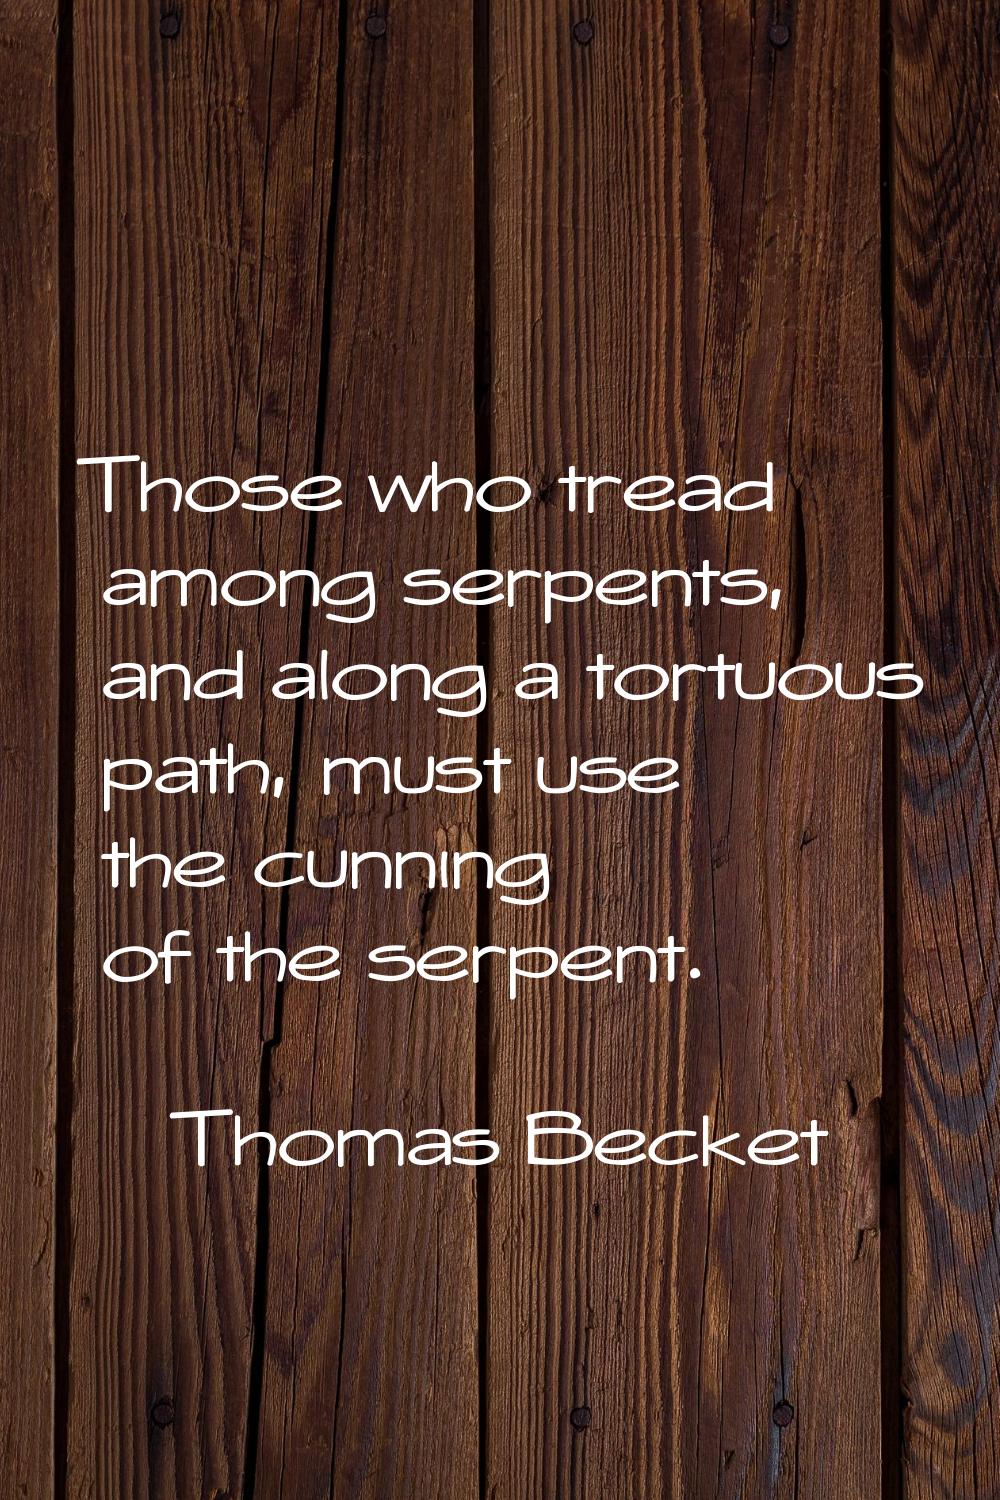 Those who tread among serpents, and along a tortuous path, must use the cunning of the serpent.